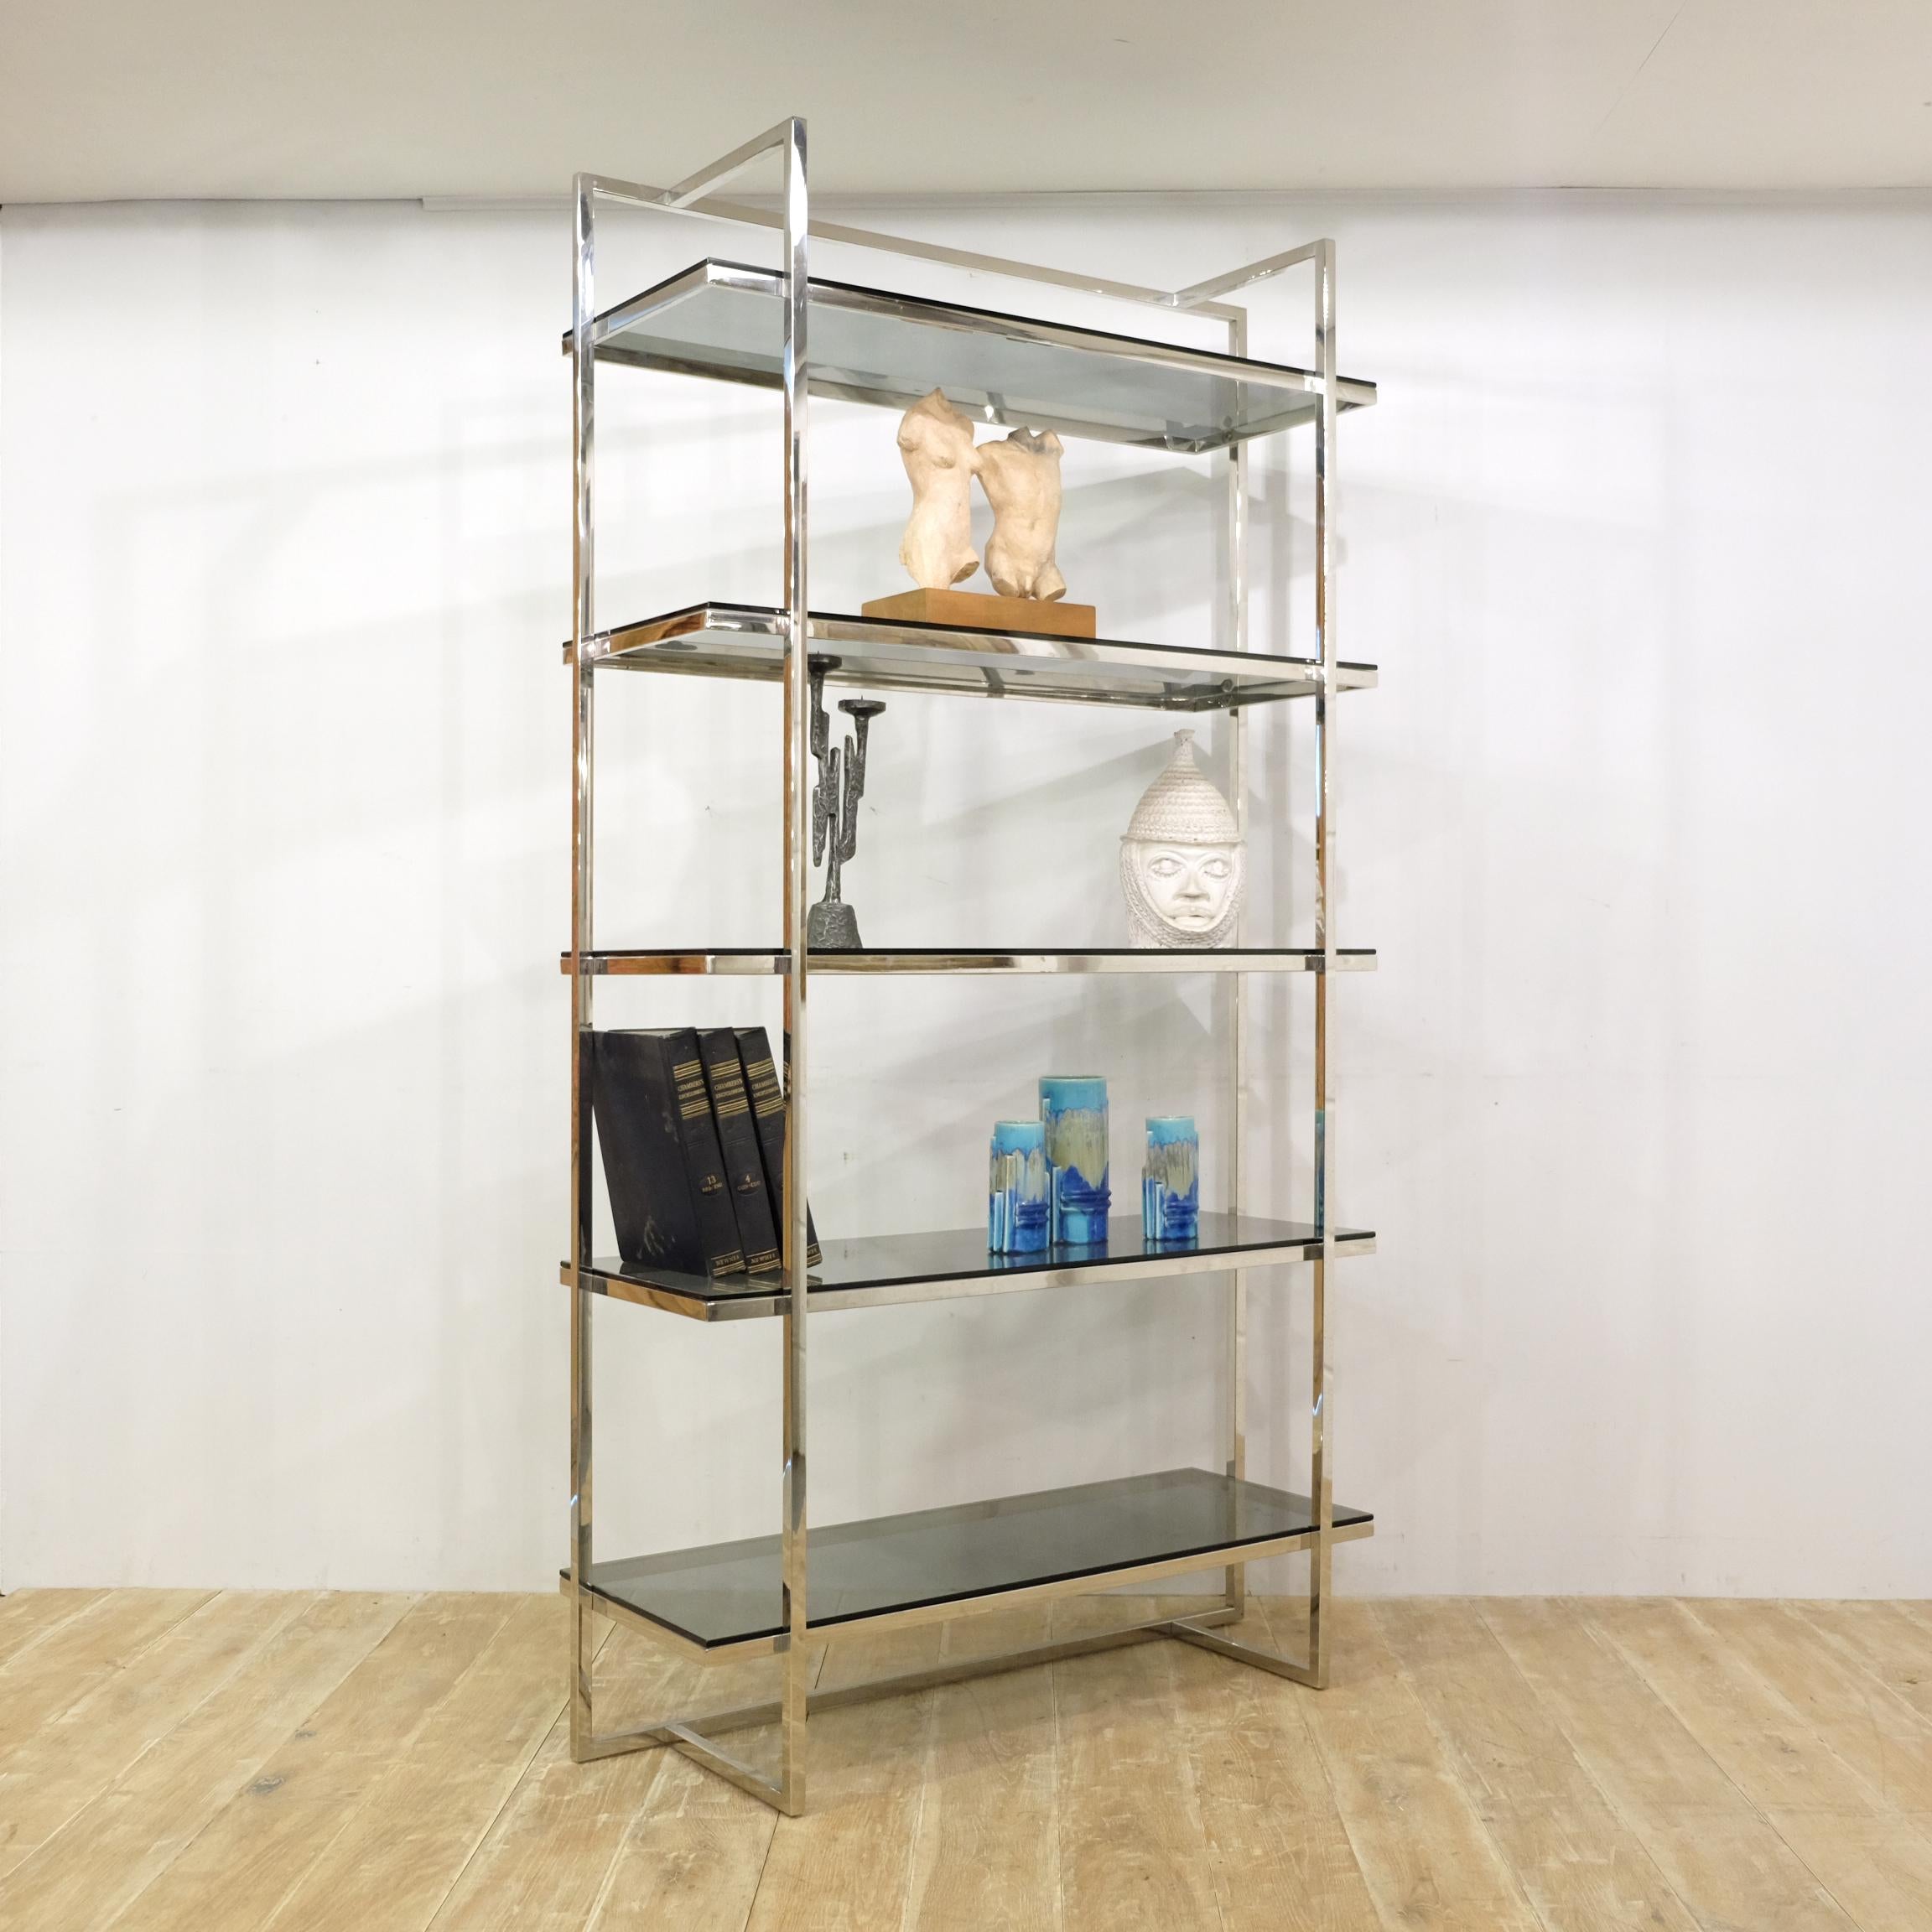 A mid-late 20th century freestanding shelving unit in chromed metal with five thick smoked glass removable shelves. A stylish piece with a somewhat modernist feel, though this one is likely 1970s. Simple, angular, sleek and unusual design. Similar